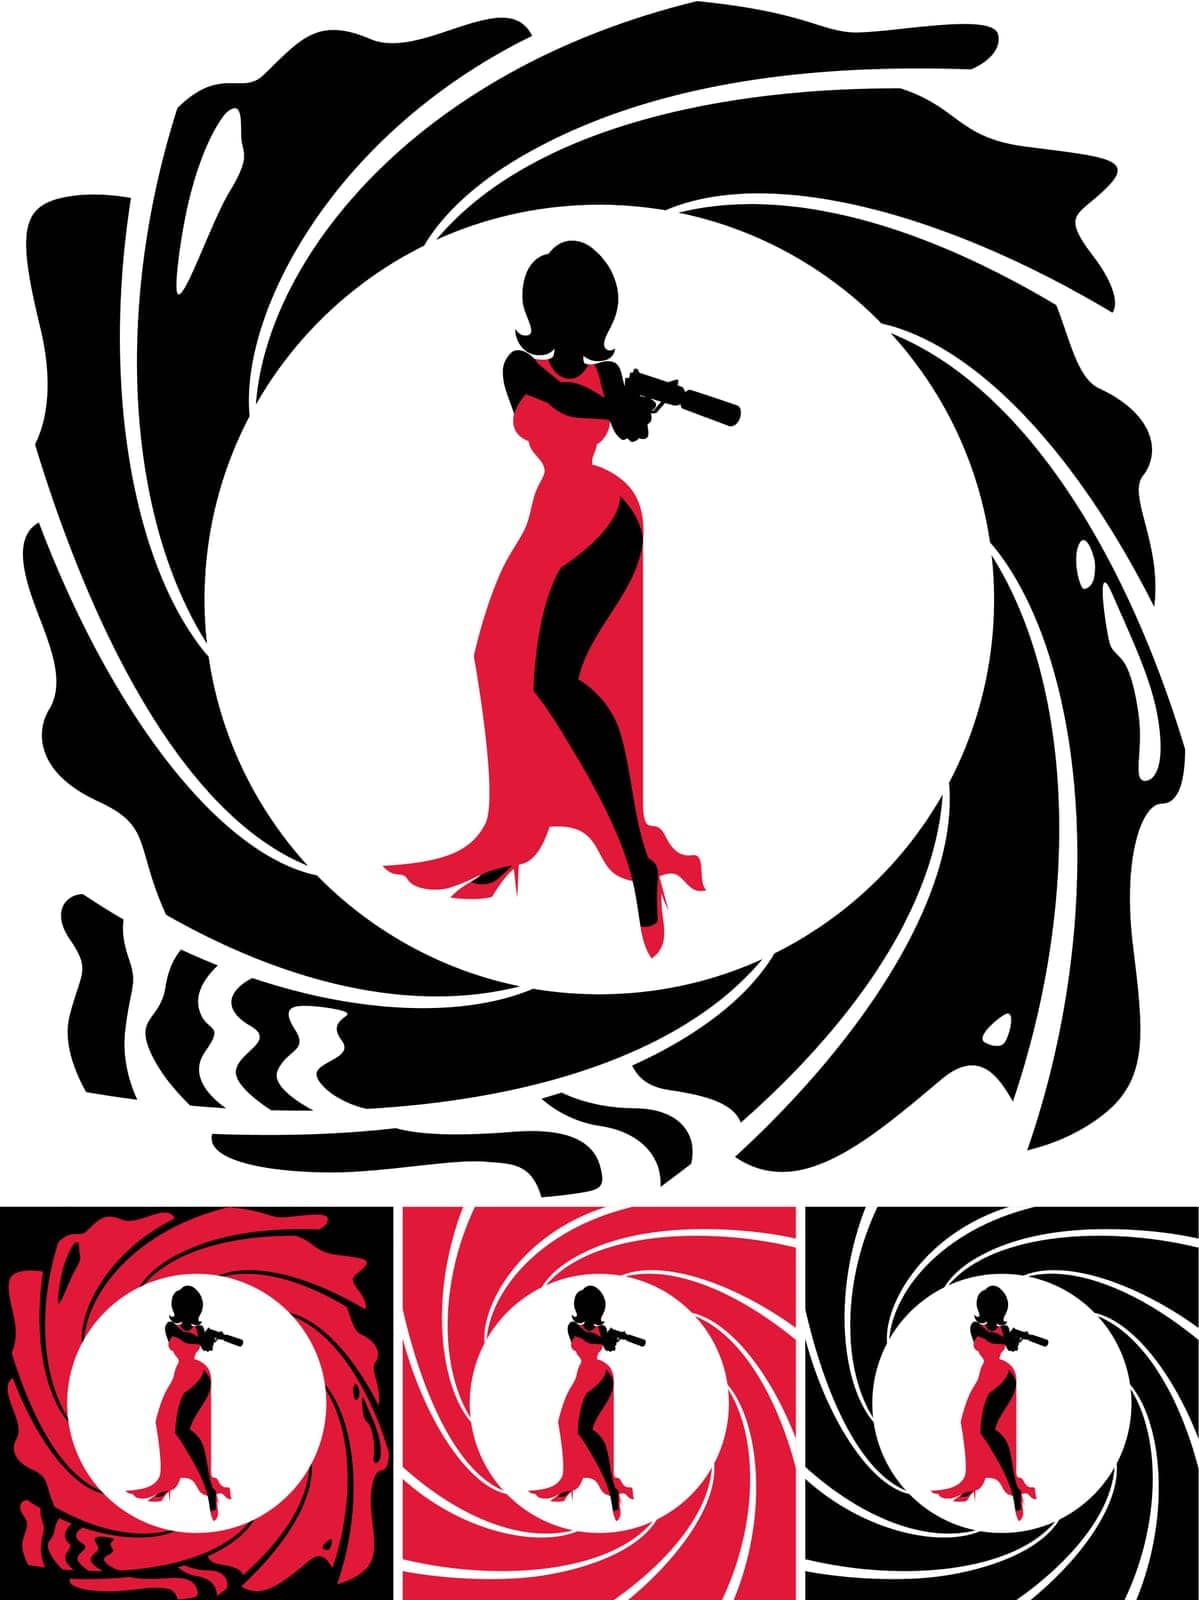 Silhouette of female secret agent. Illustration is in 4 versions. No transparency and gradients used. 

